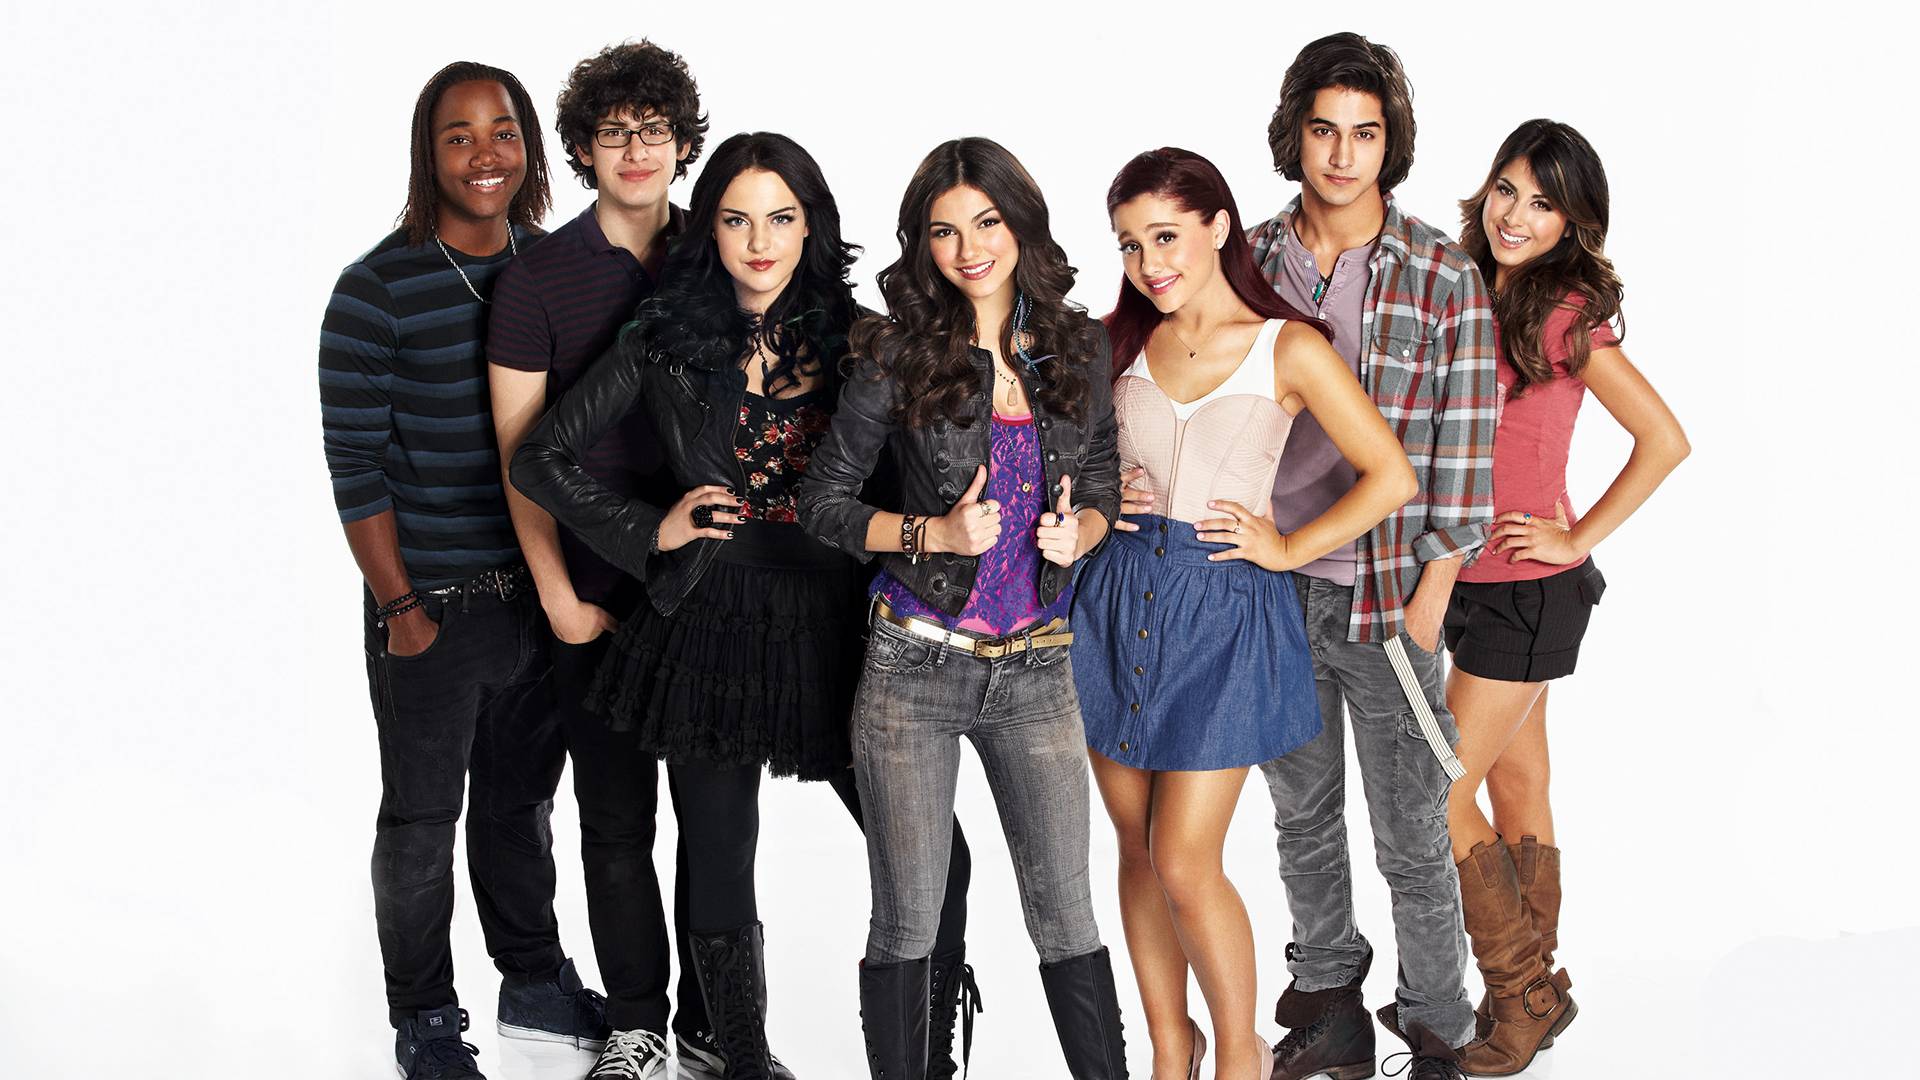 Victorious Wallpapers - Wallpaper Cave 6AC